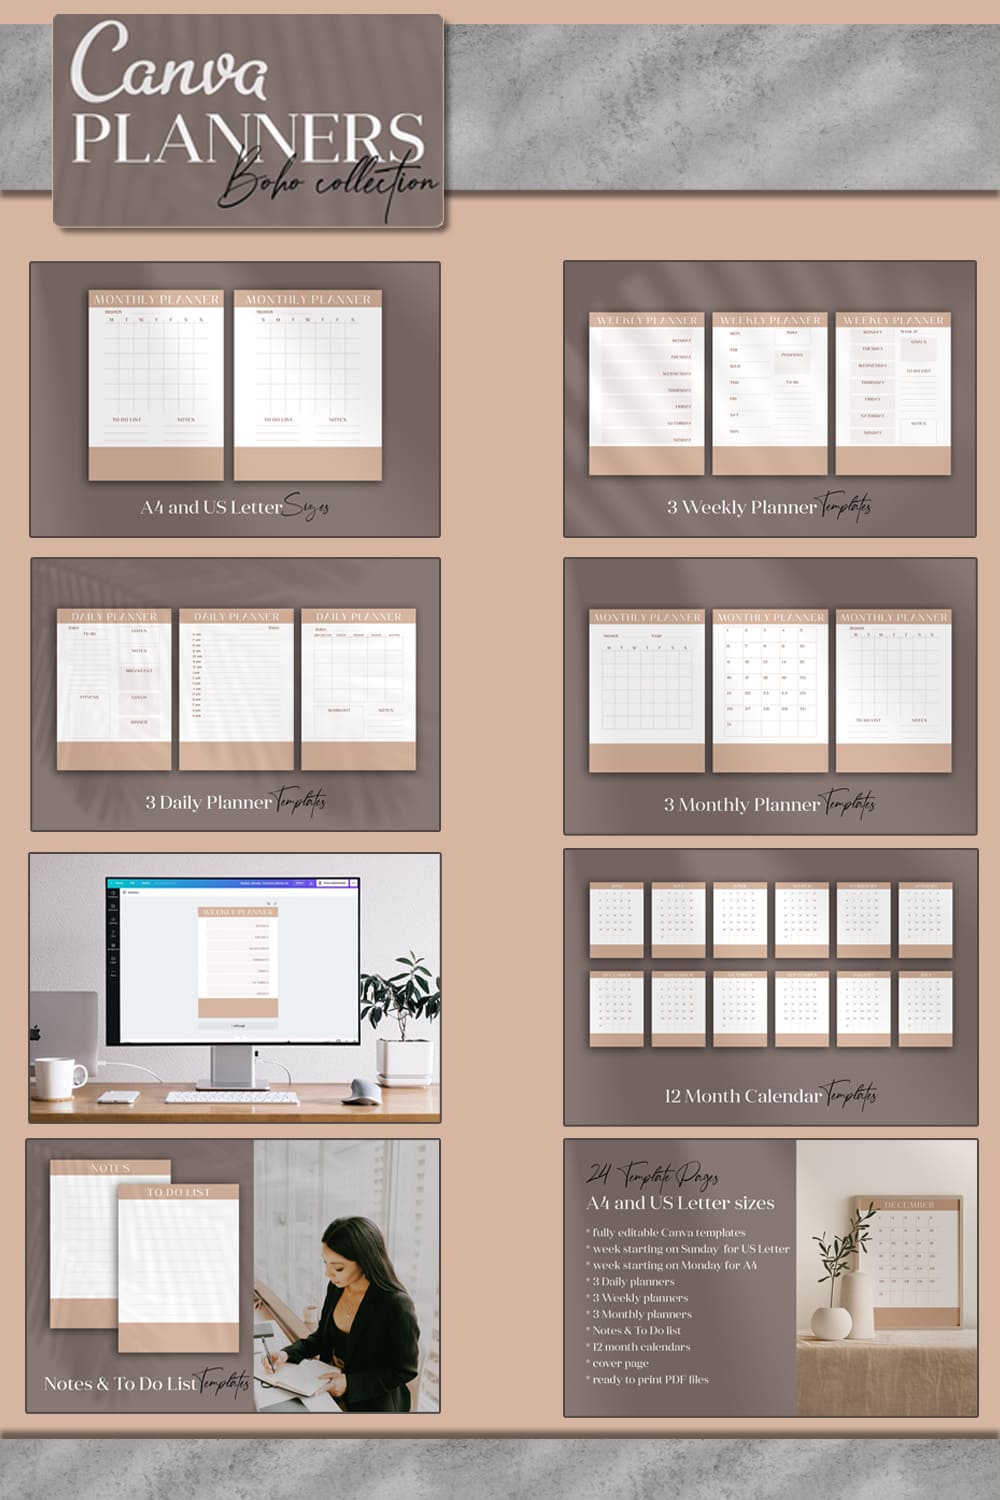 canva planners boho collection pinterest 1000 1500